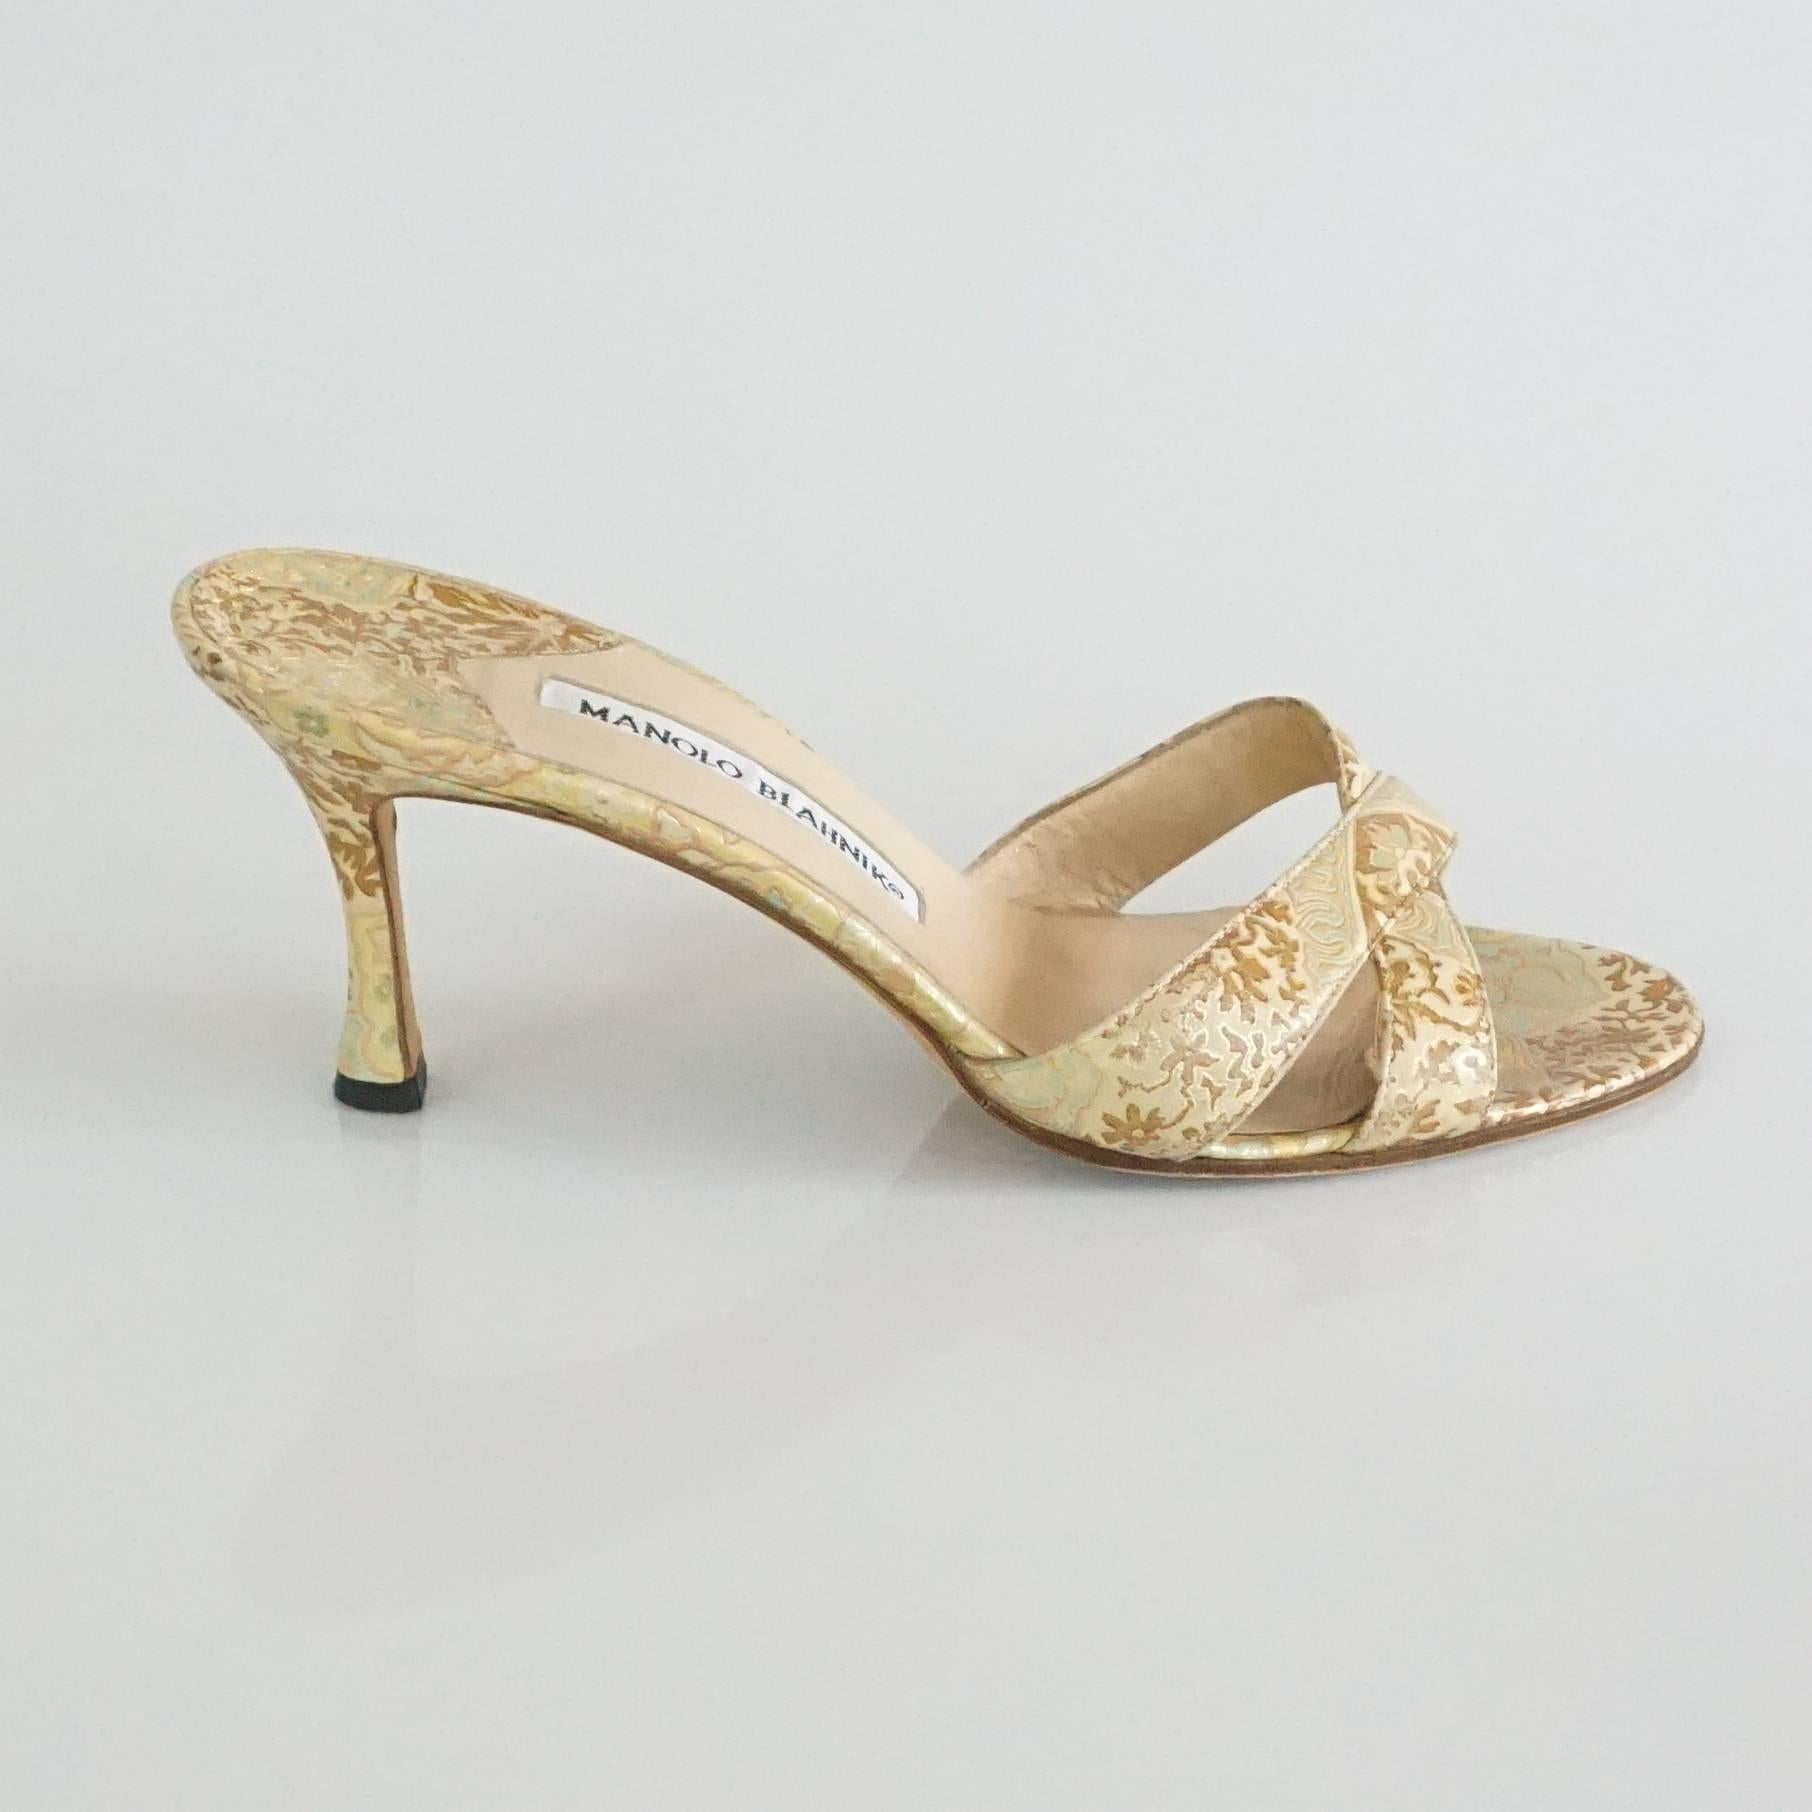 Manolo Blahnik Gold Leather Brocade Printed Slides - 37. These heels have an ornate, shimmery feel. They feature a tan and gold brocade print, crossing front straps, and a low heel. They are in excellent condition with some wear on the inside and